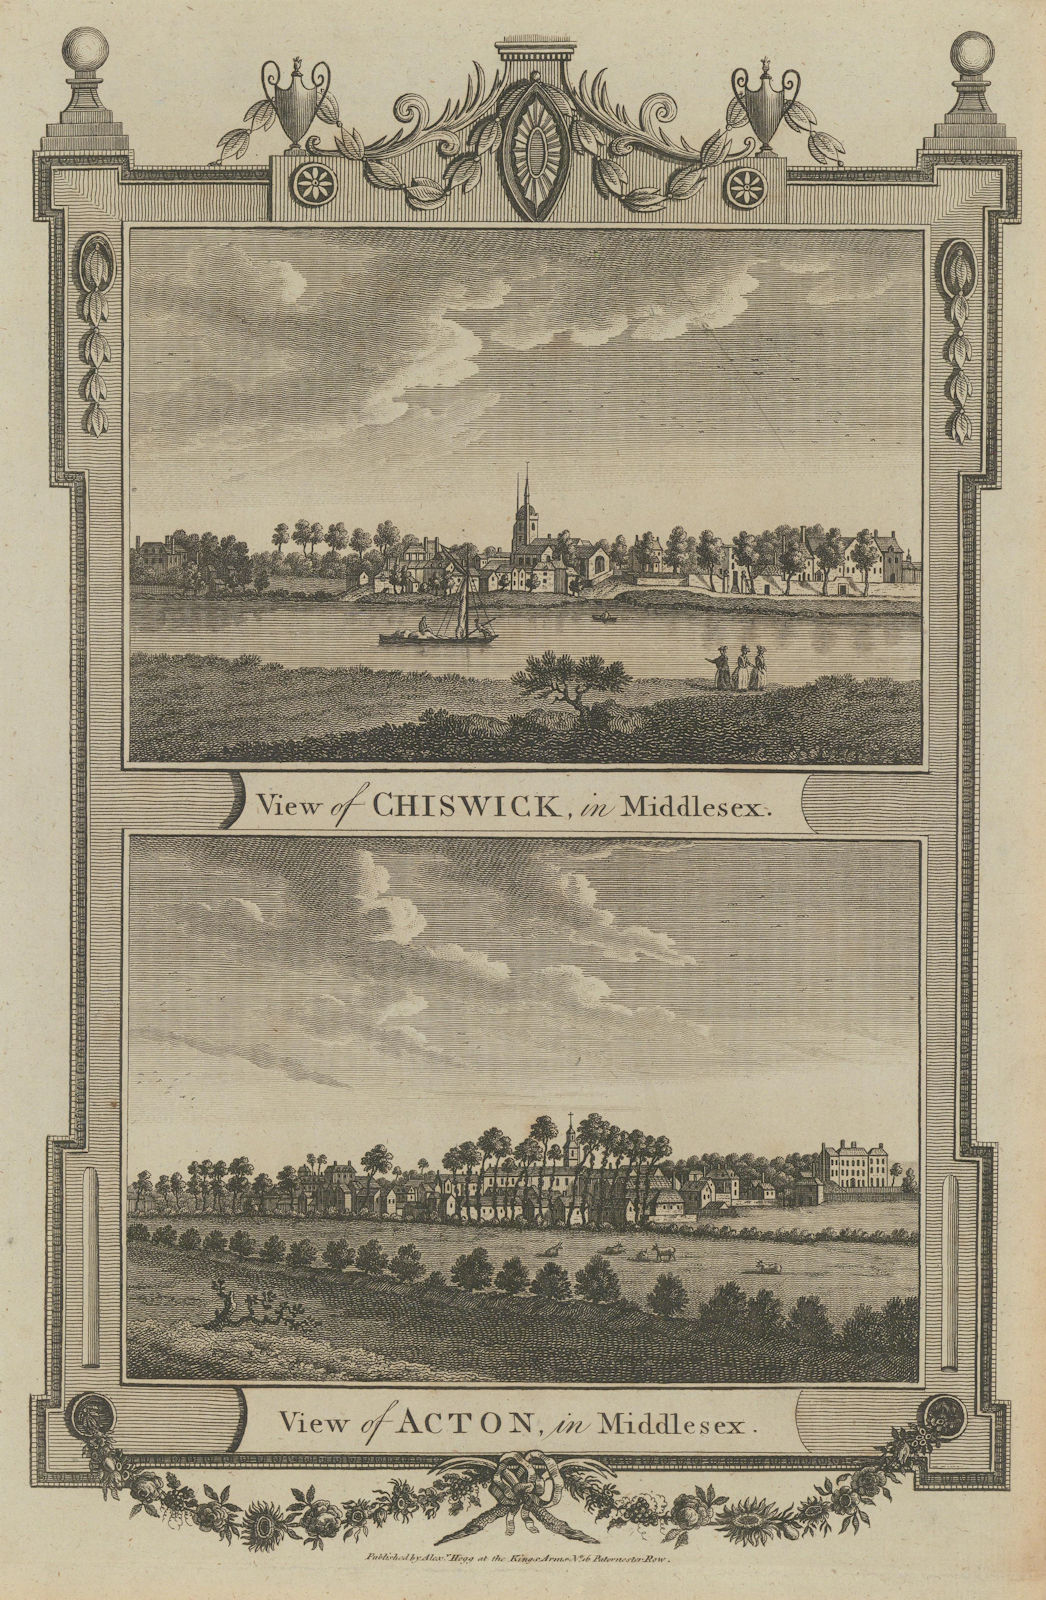 Associate Product Chiswick, the Mall & St Nicholas church. Acton Central & St Mary's THORNTON 1784